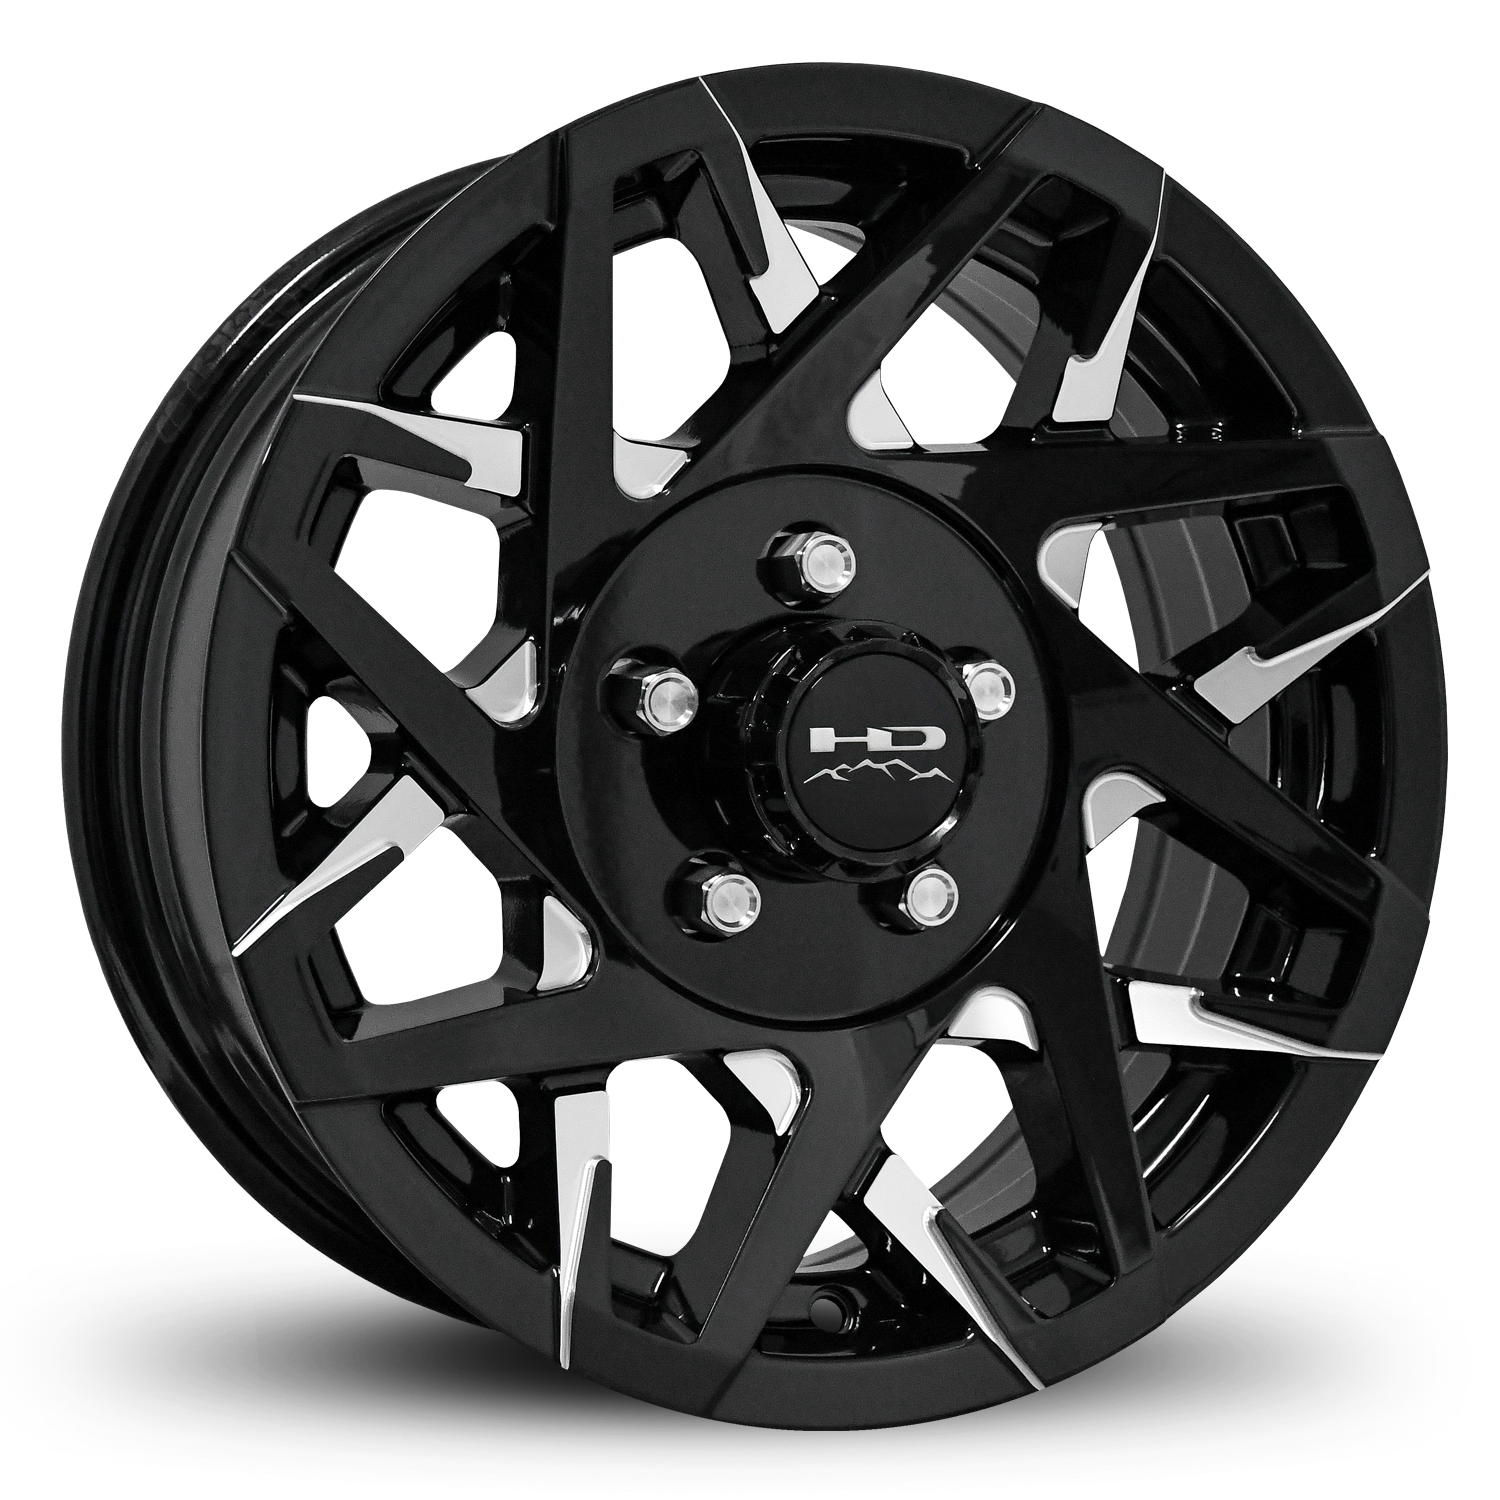 HD Off-Road Canyon Custom Trailer Wheel Rims in 14x5.5 Gloss Black CNC Milled Face Spokes with Center Cap & Logo fits 5x4.50 / 5x114.3 Axle Boat, Car, RV, Travel, Concession, Horse, Utility, Lawn & Garden, & Landscaping.